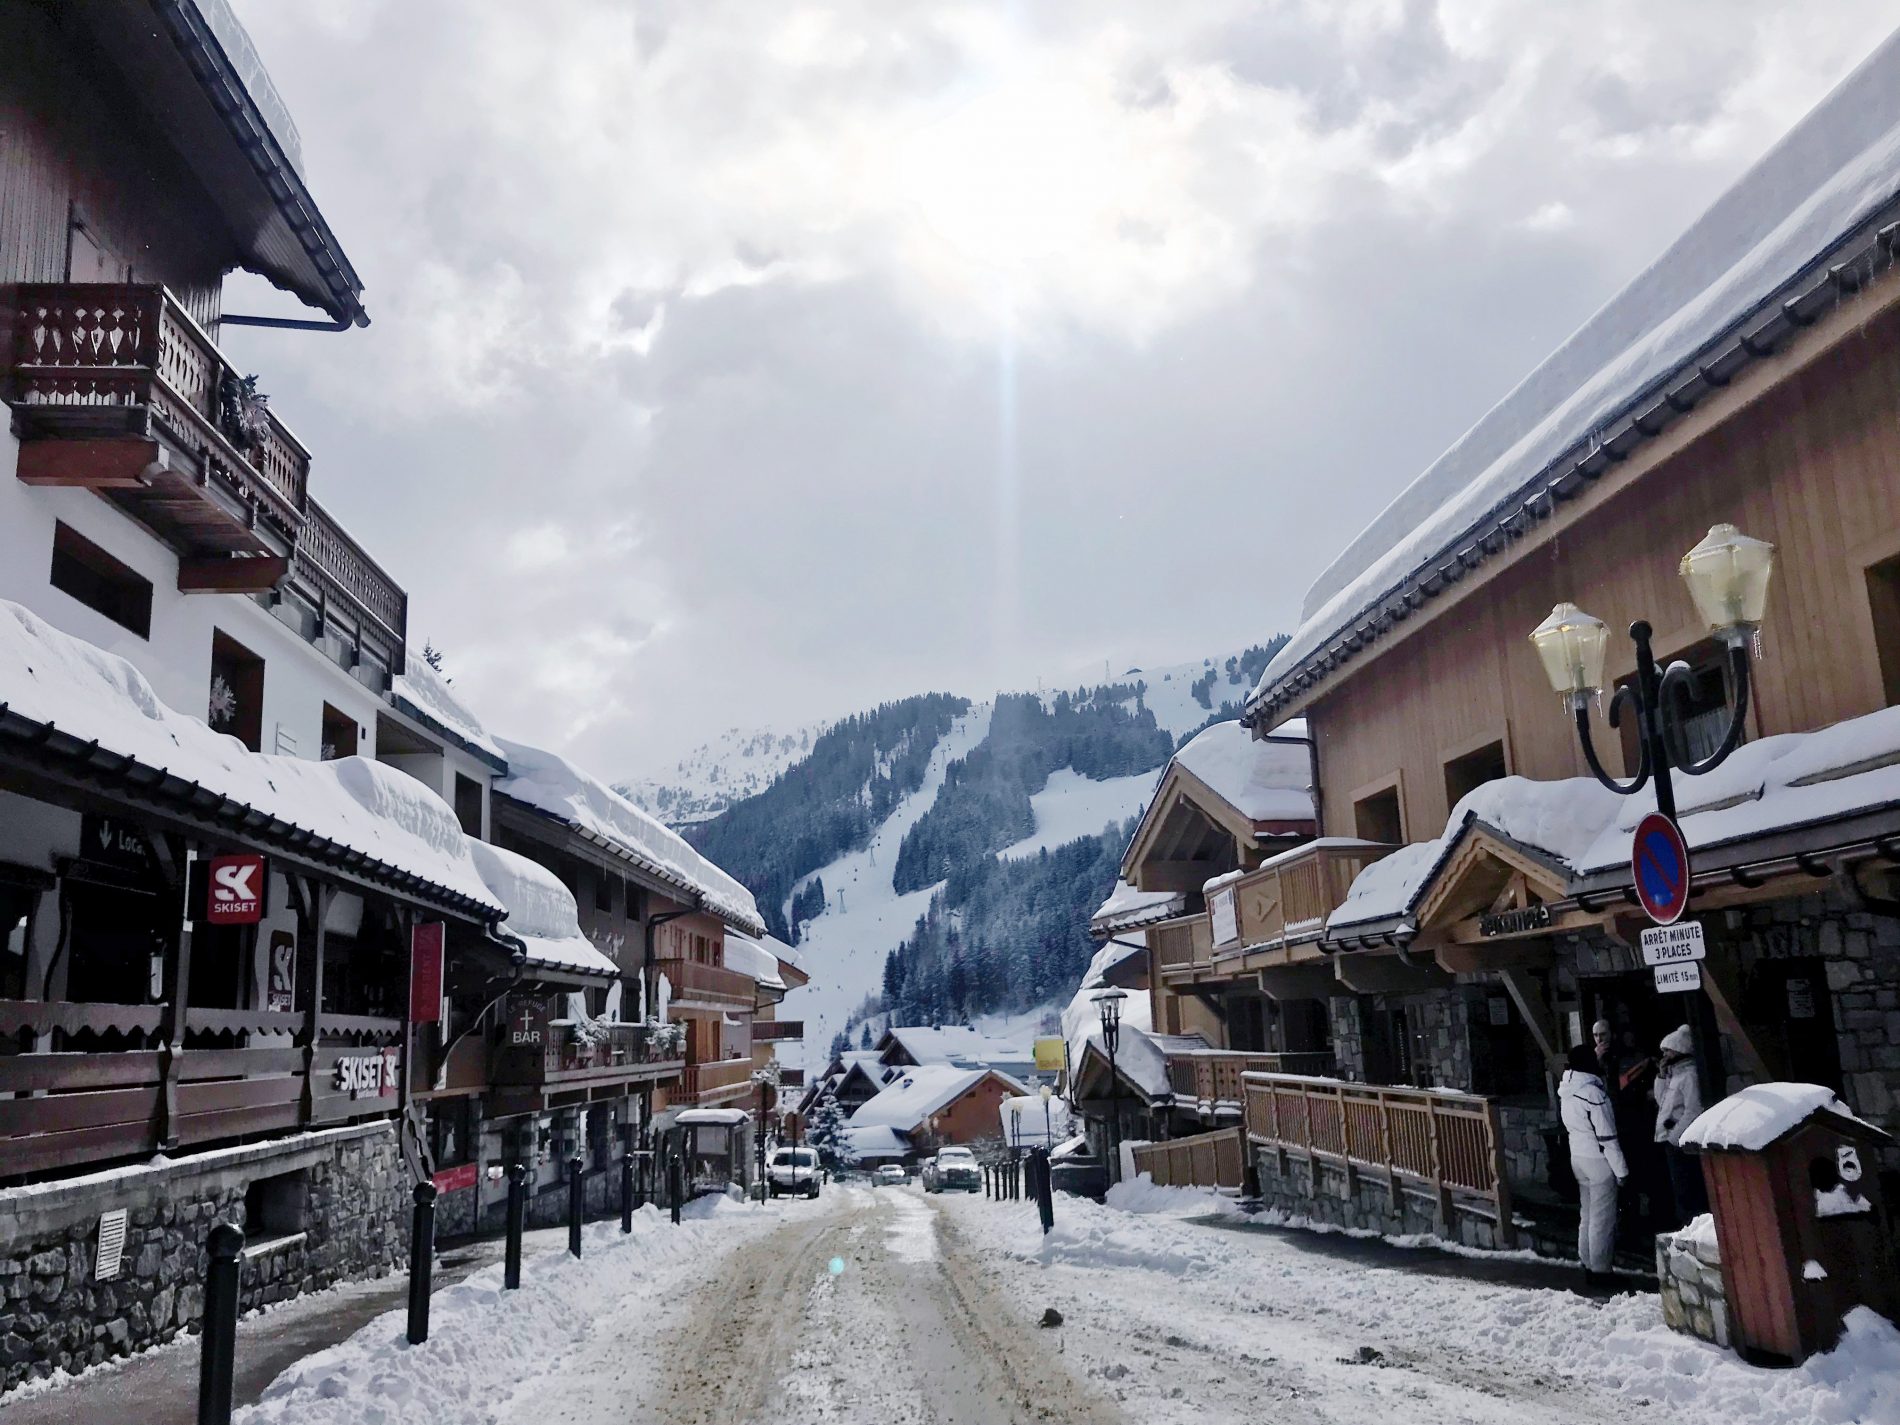 Les 3 Vallées: Having the Best Day in Méribel, France as a 20-Something